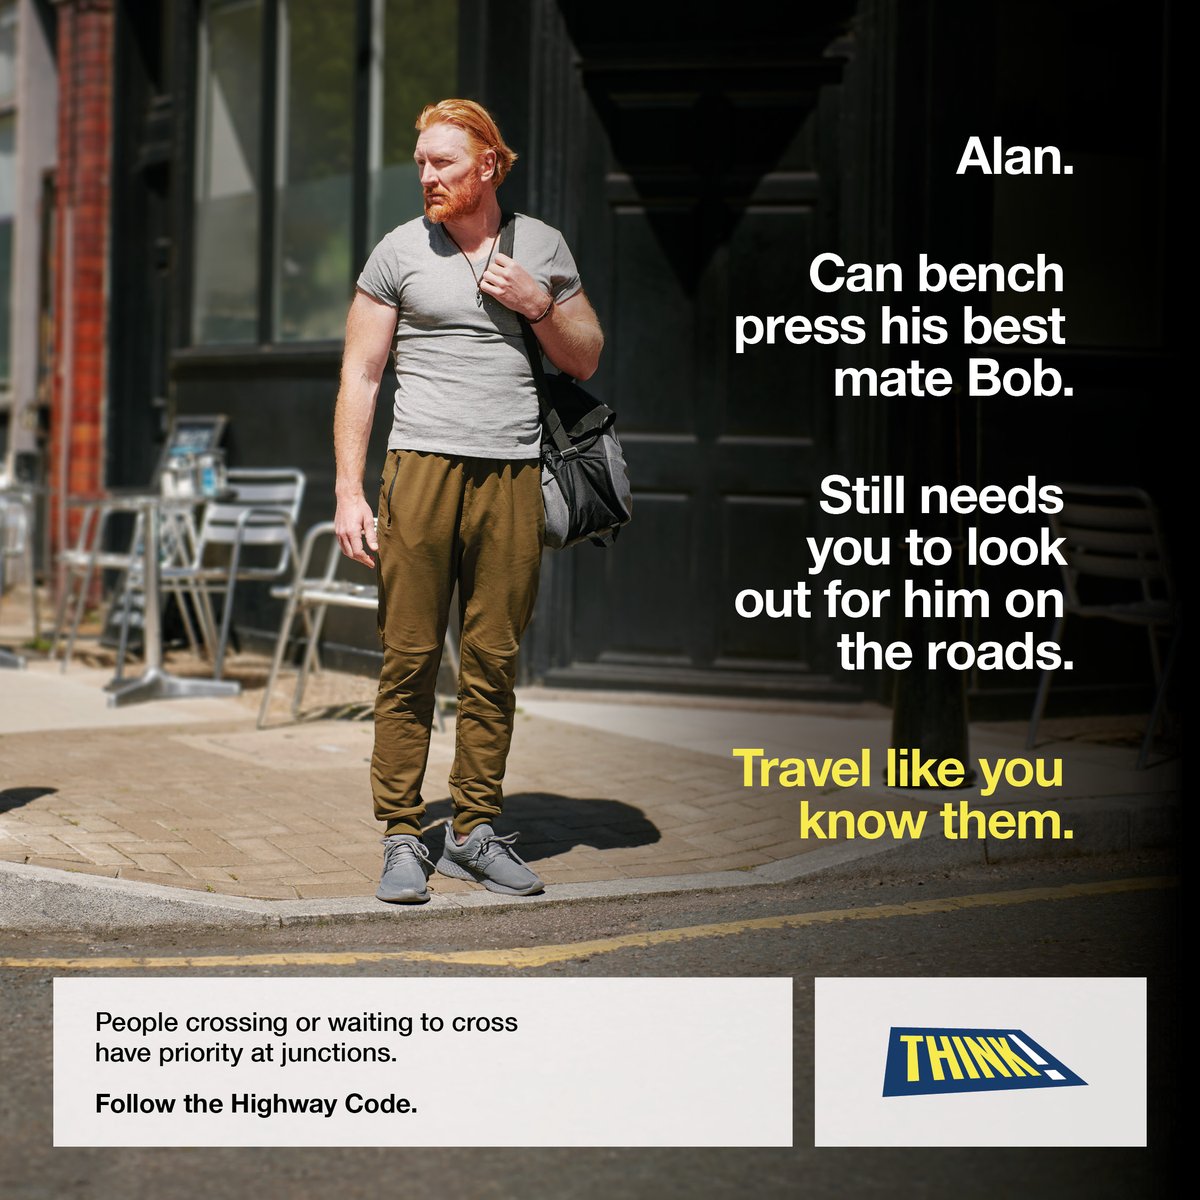 Stay safe when travelling in Medway Everyone is someone’s best friend, cousin, parent or neighbour, so make sure you #TravelLikeYouKnowThem and keep Medway's community safe. To find out more about changes to the #HighwayCode visit: orlo.uk/gZA11